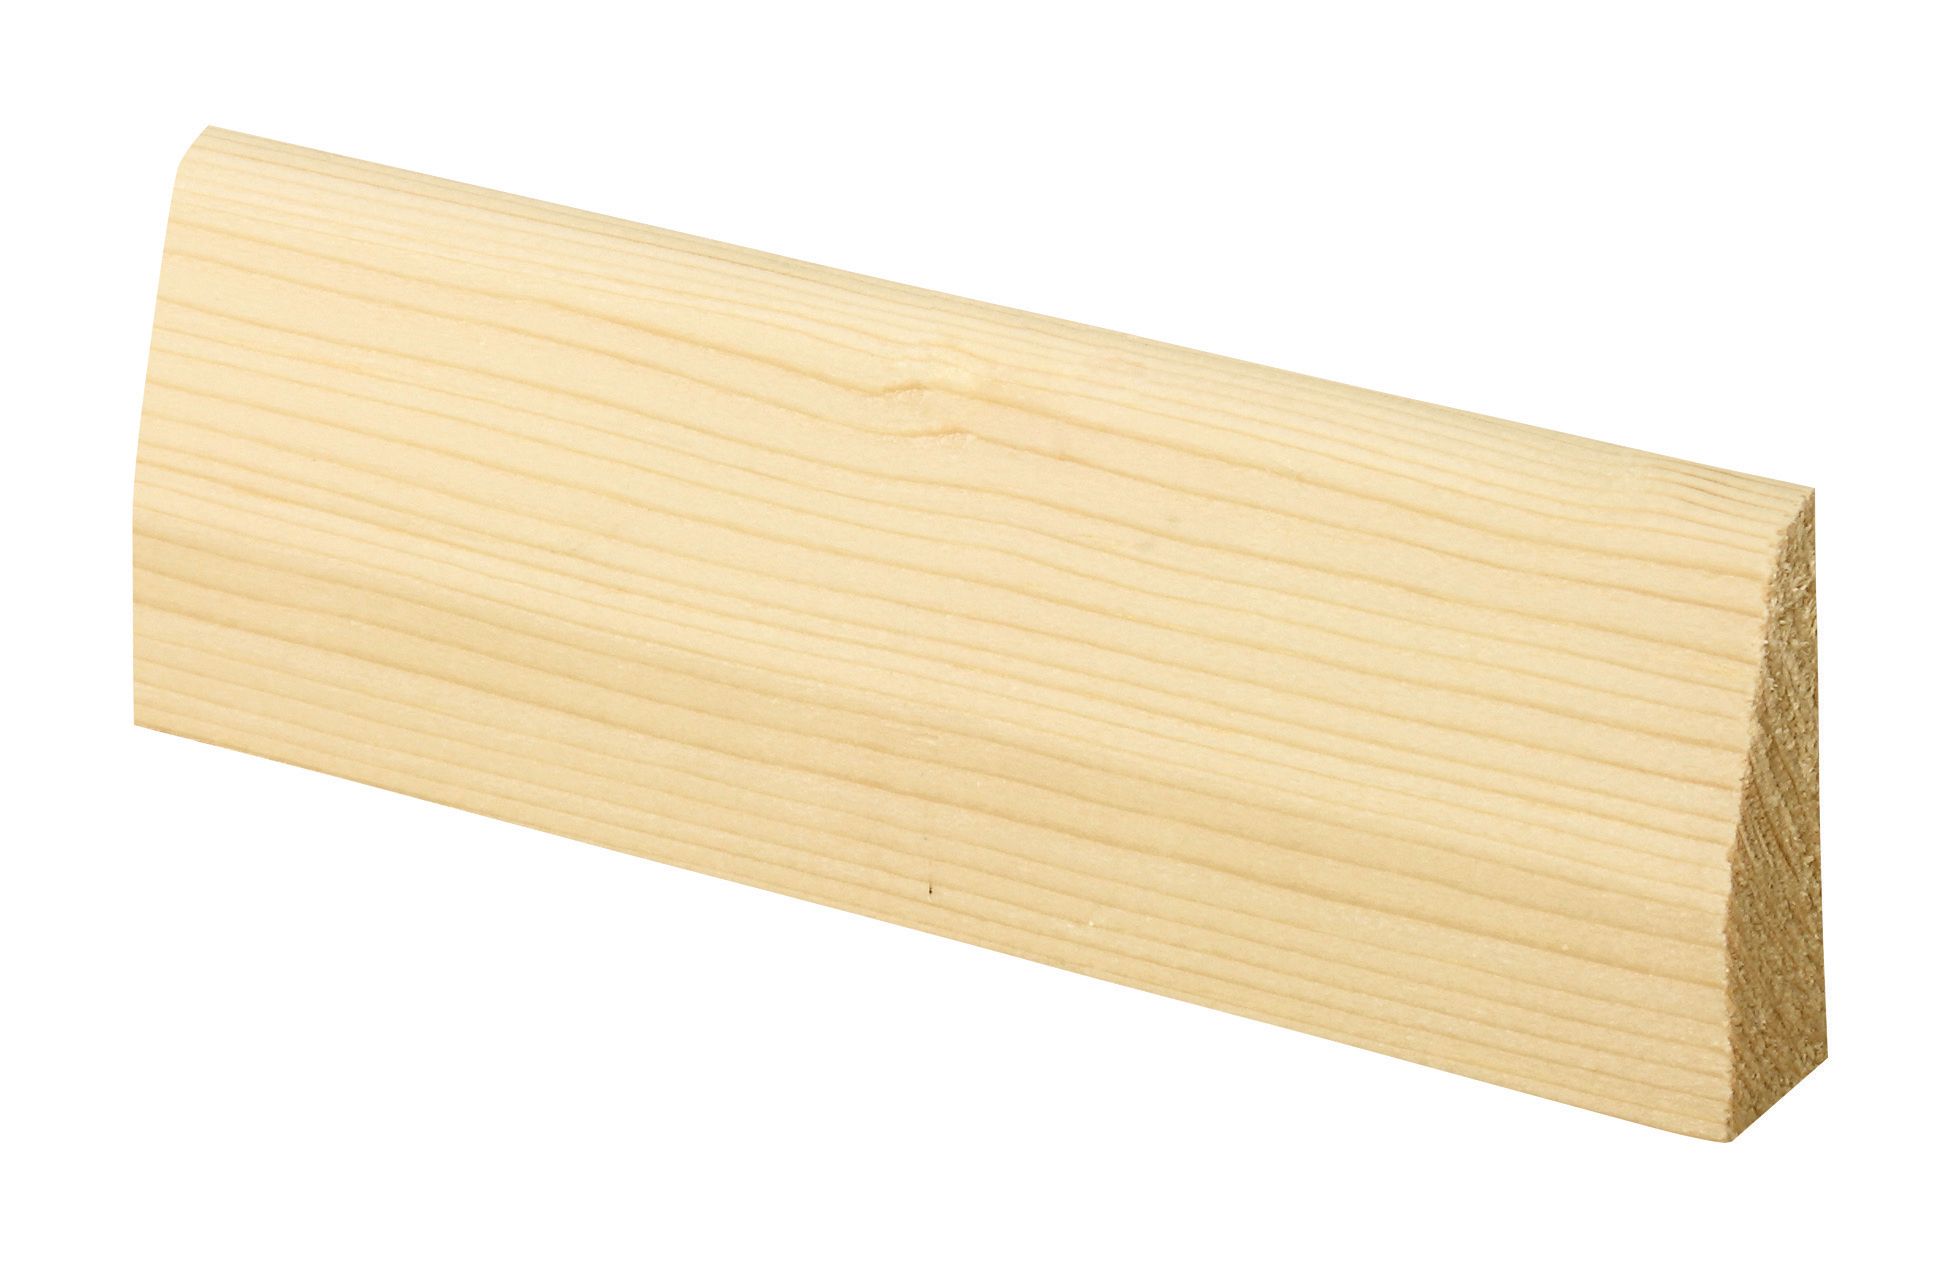 Wickes Chamfered Pine Architrave - 15mm x 45mm x 2.1m